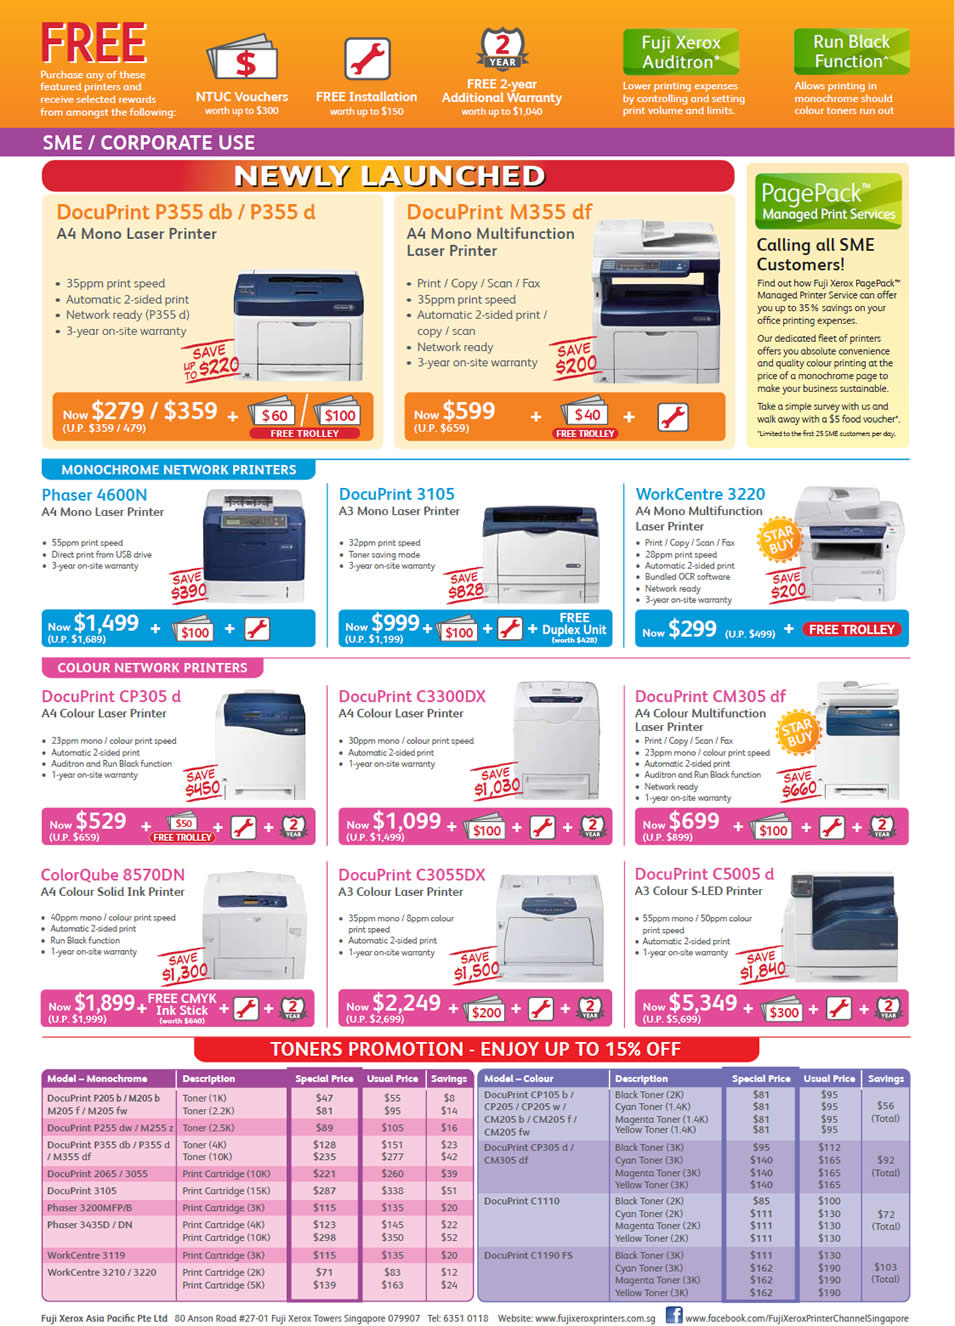 COMEX 2012 price list image brochure of Fuji Xerox Printers DocuPrint P355DB, P355D, M355DF, 3105, CP305D, C3300DX, CM305DF, C5005D, C3005DX, B570DN, Phaser 4600N, WorkCentre 3220